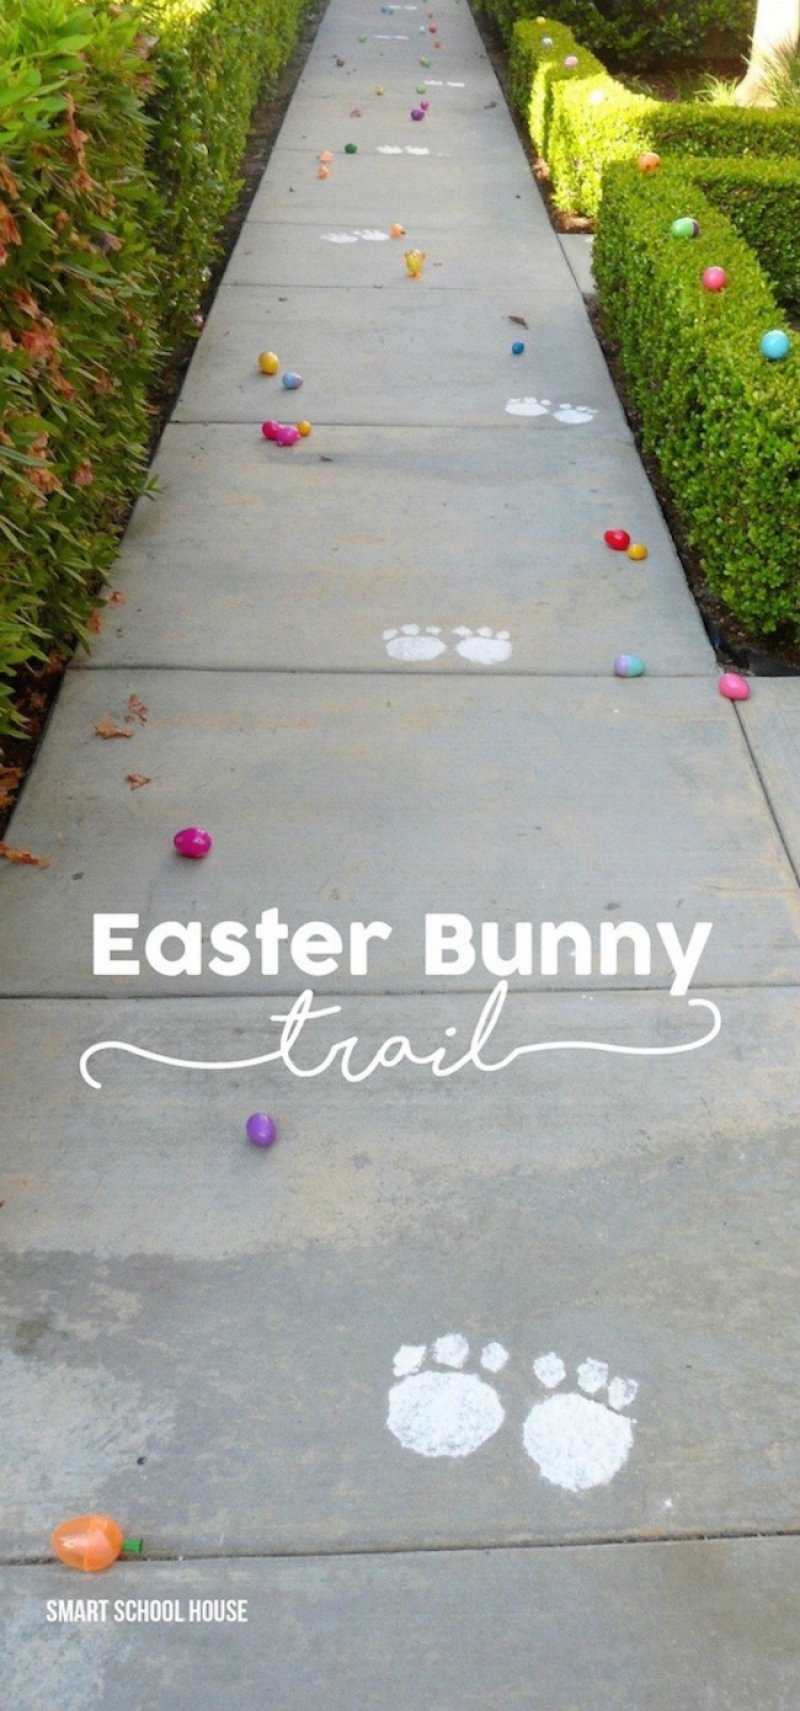 Easter Bunny Trail.